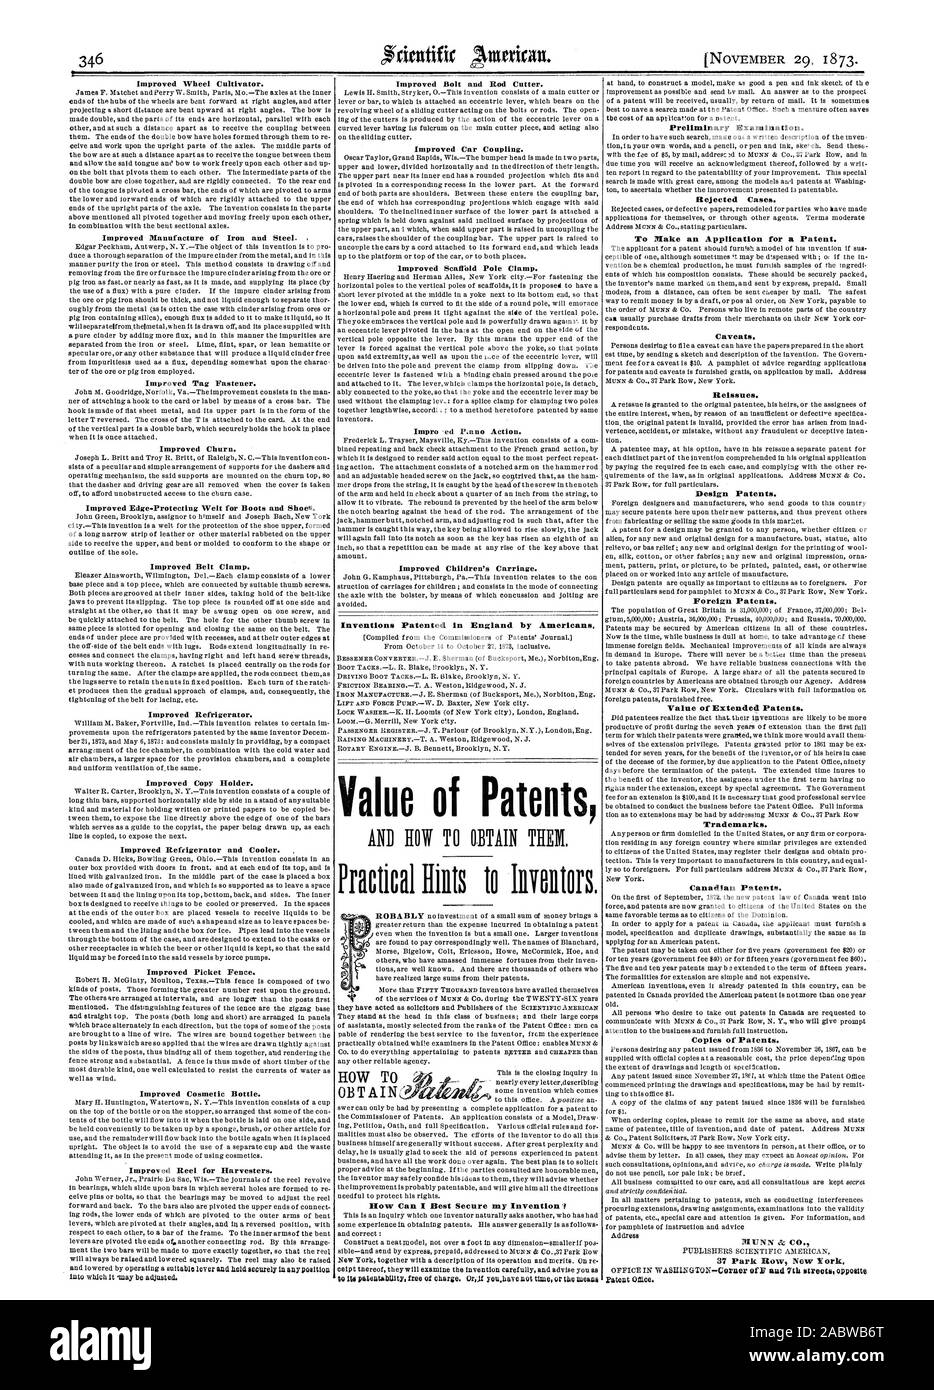 Improved Bolt and Rod Cutter. Improved Car Coupling. Improved Scaffold Pole Clamp. Improved Children's Carriage. Inventions Patented in England by Americans. Value of Patents Practical lifts to Ilivolliors. Preliminary Examination. Caveats. Reissues. Design Patents. Foreign Patents. Value of Extended Patents. Trademarks. Canadian Patents. Copies of Patents. OBTAIN2ff Improved Wheel Cultivator. Improved Manufacture of Iron and Steel. Improved Tag Fastener. Improved Churn. Improved Belt Clamp. Improved Refrigerator. Improved Copy Holder. Improved Refrigerator and Cooler. Improved Picket Fence Stock Photo